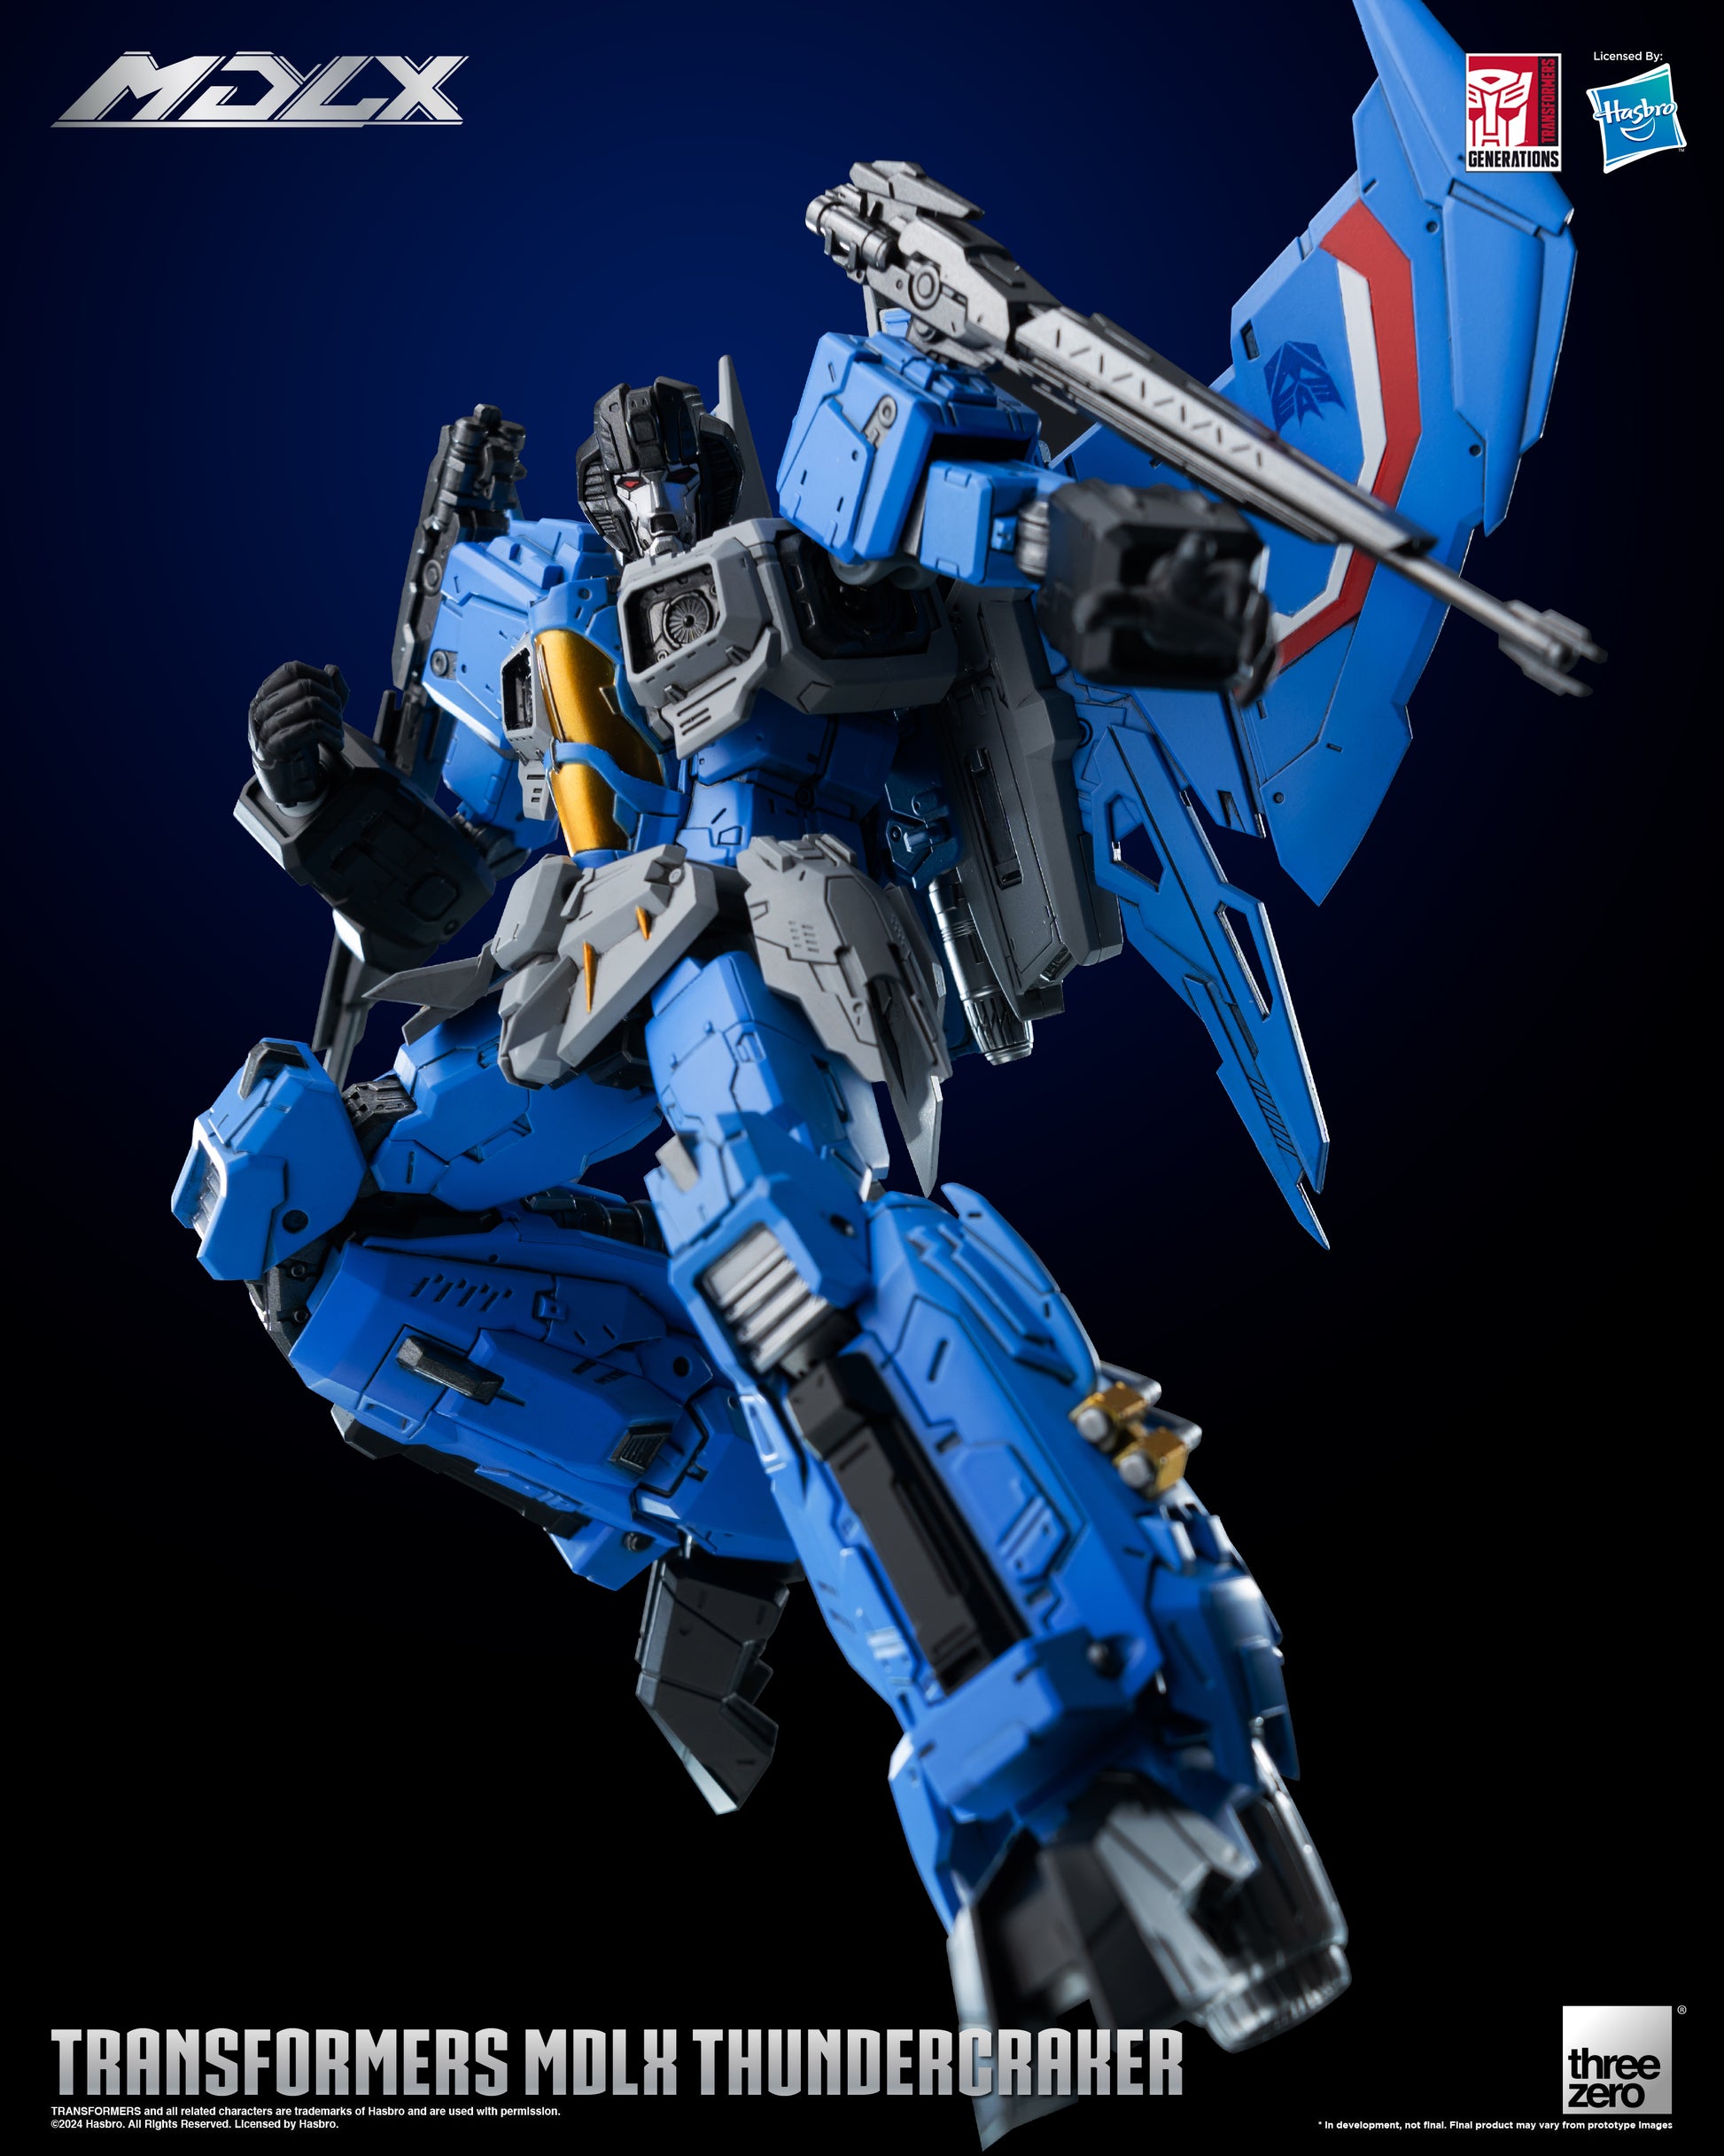 Transformers MDLX Articulated Figure Series Thundercracker left view pose